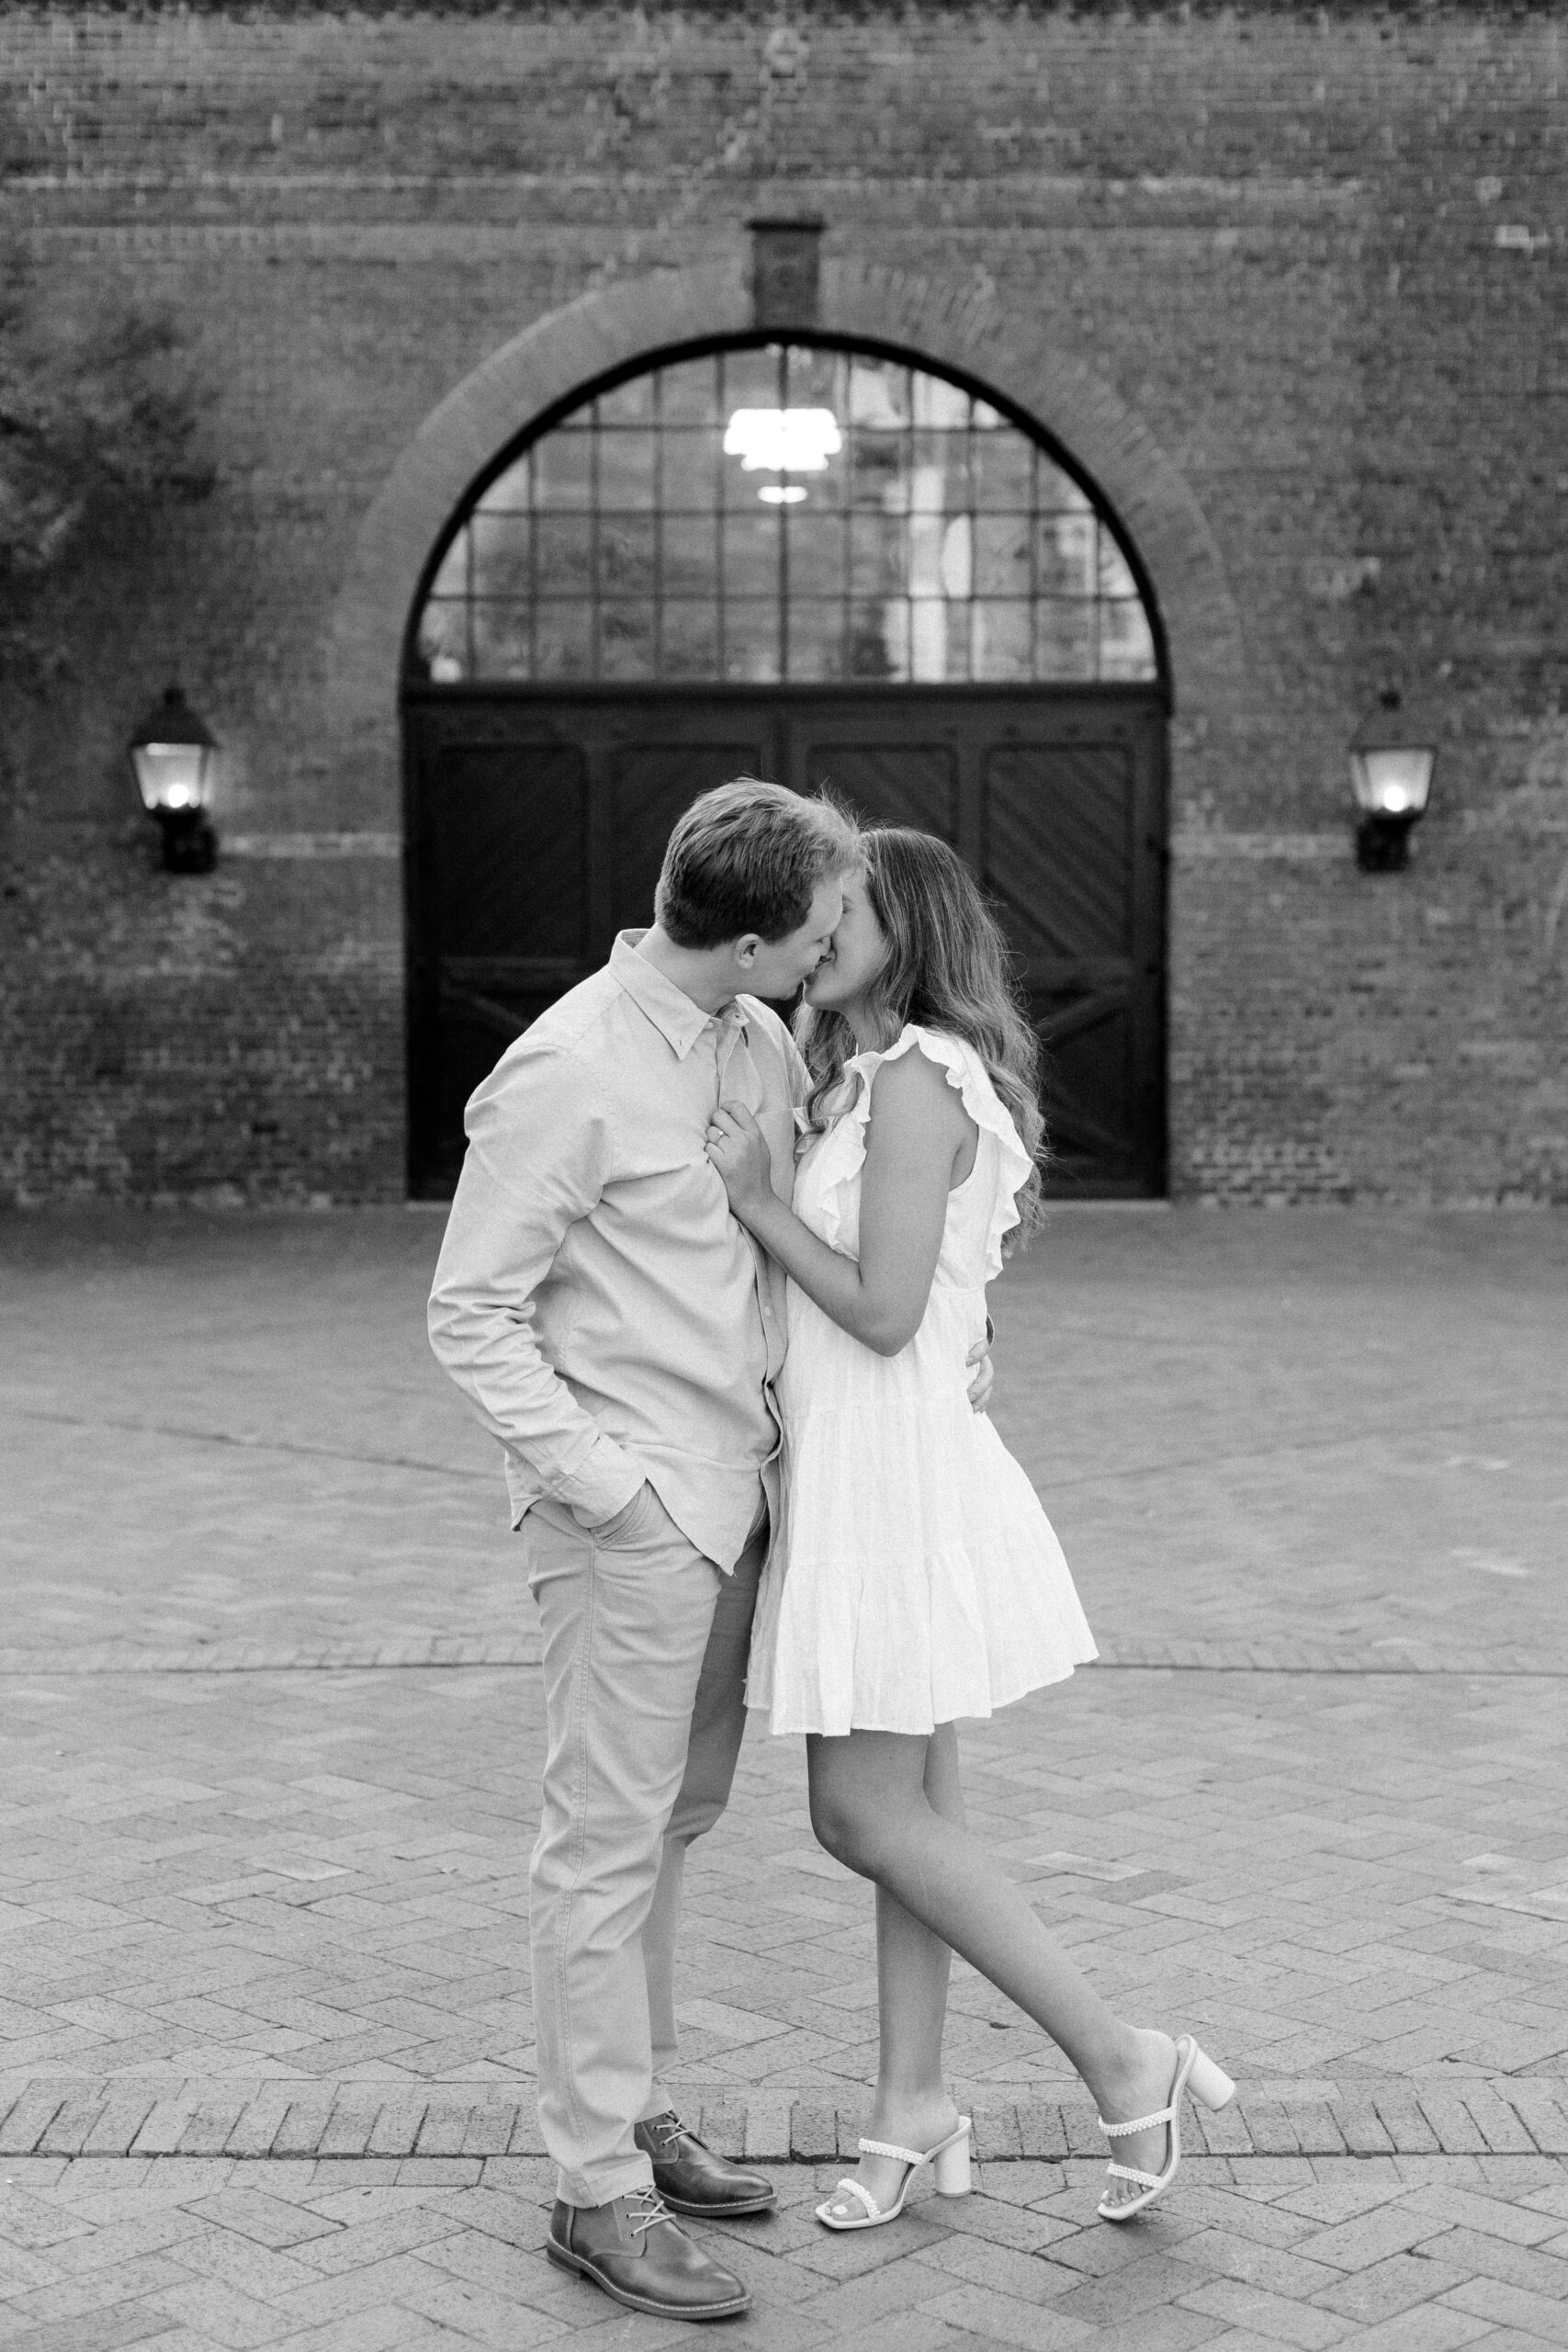 Black and white full length photo of couple kissing in front of brick wall with arched doors and windows behind them